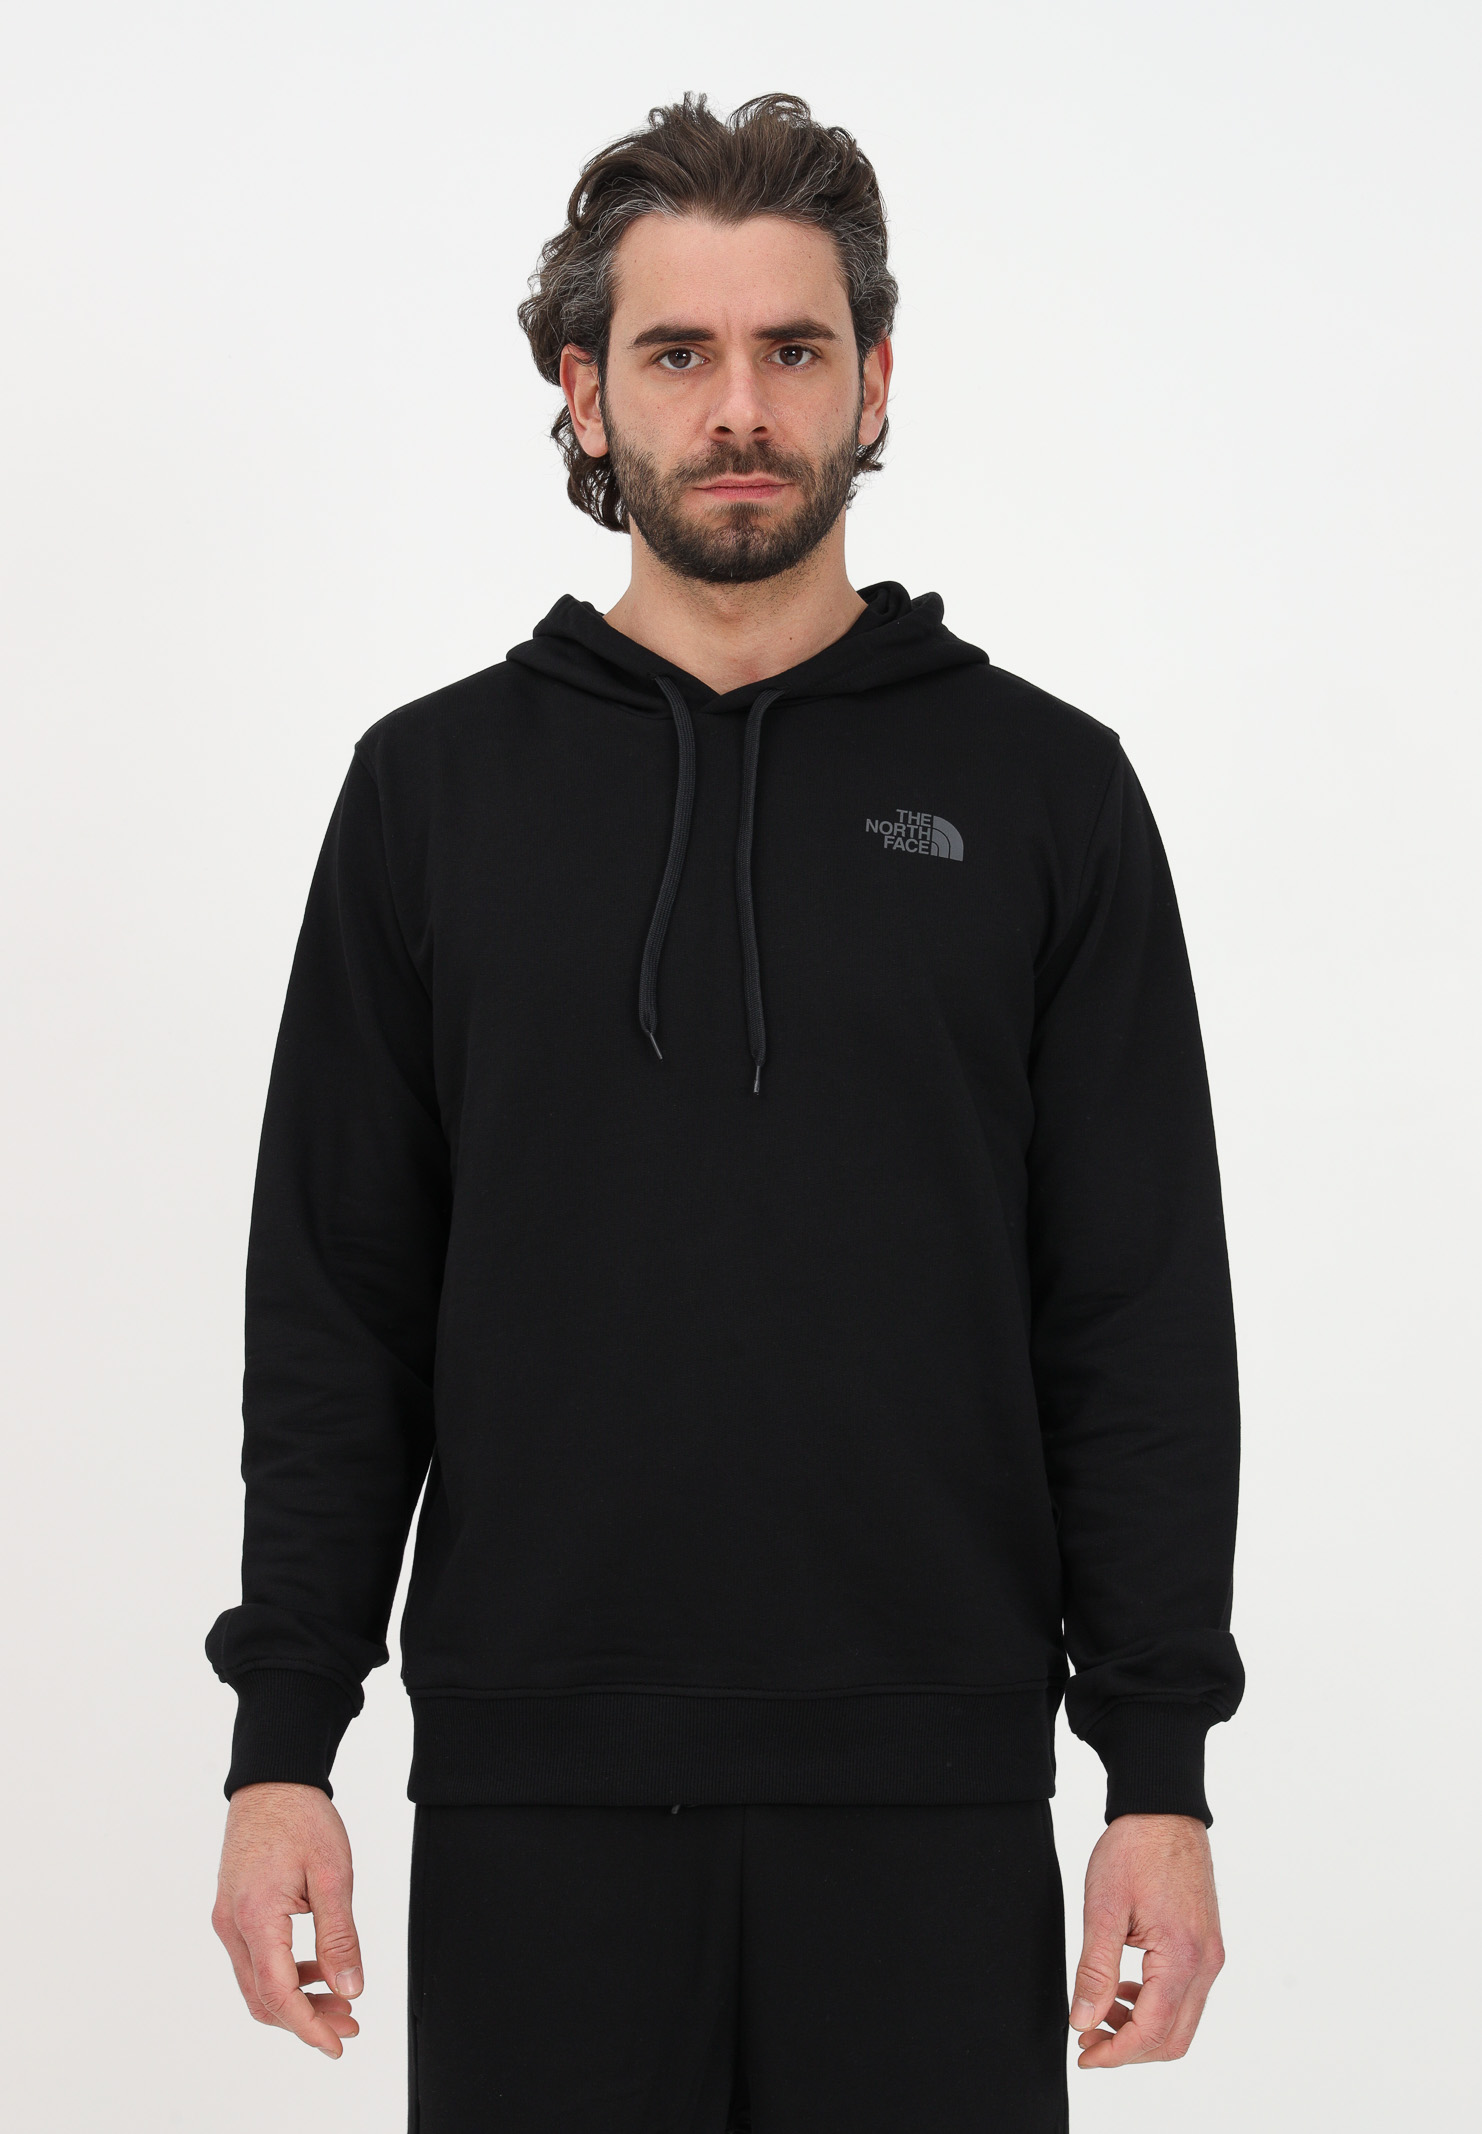 Black hoodie for men and women THE NORTH FACE | NF0A2S57JK31JK31